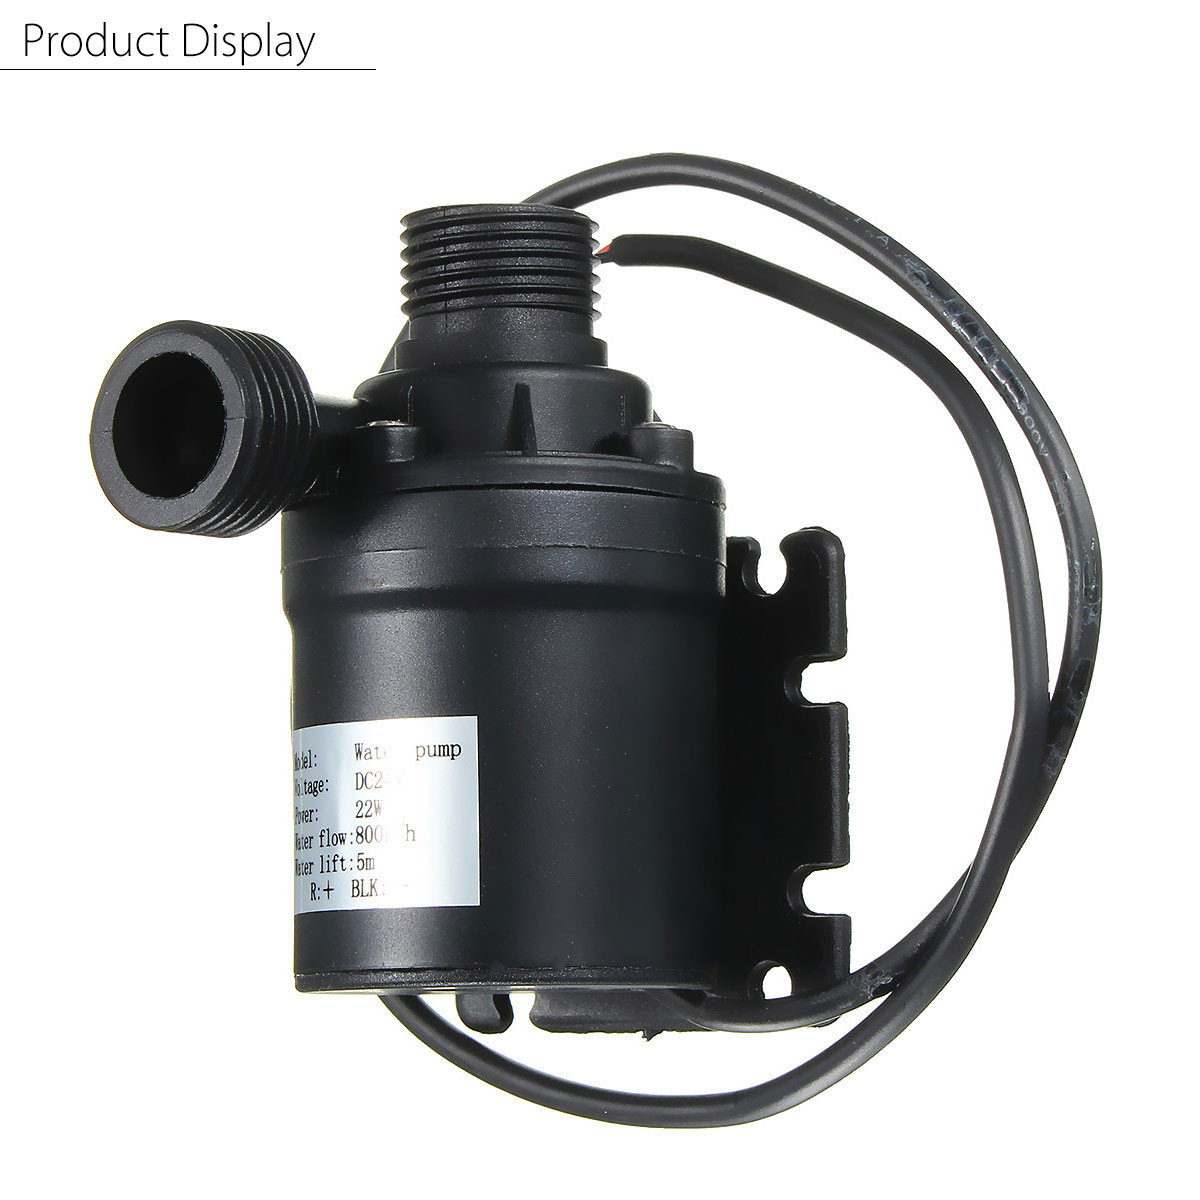 DC-24V-800LH-19W-5m-Lift-Mini-Quiet-Brushless-Motor-Submersible-Water-Pump-With-4mm-Threaded-Port-1100573-4